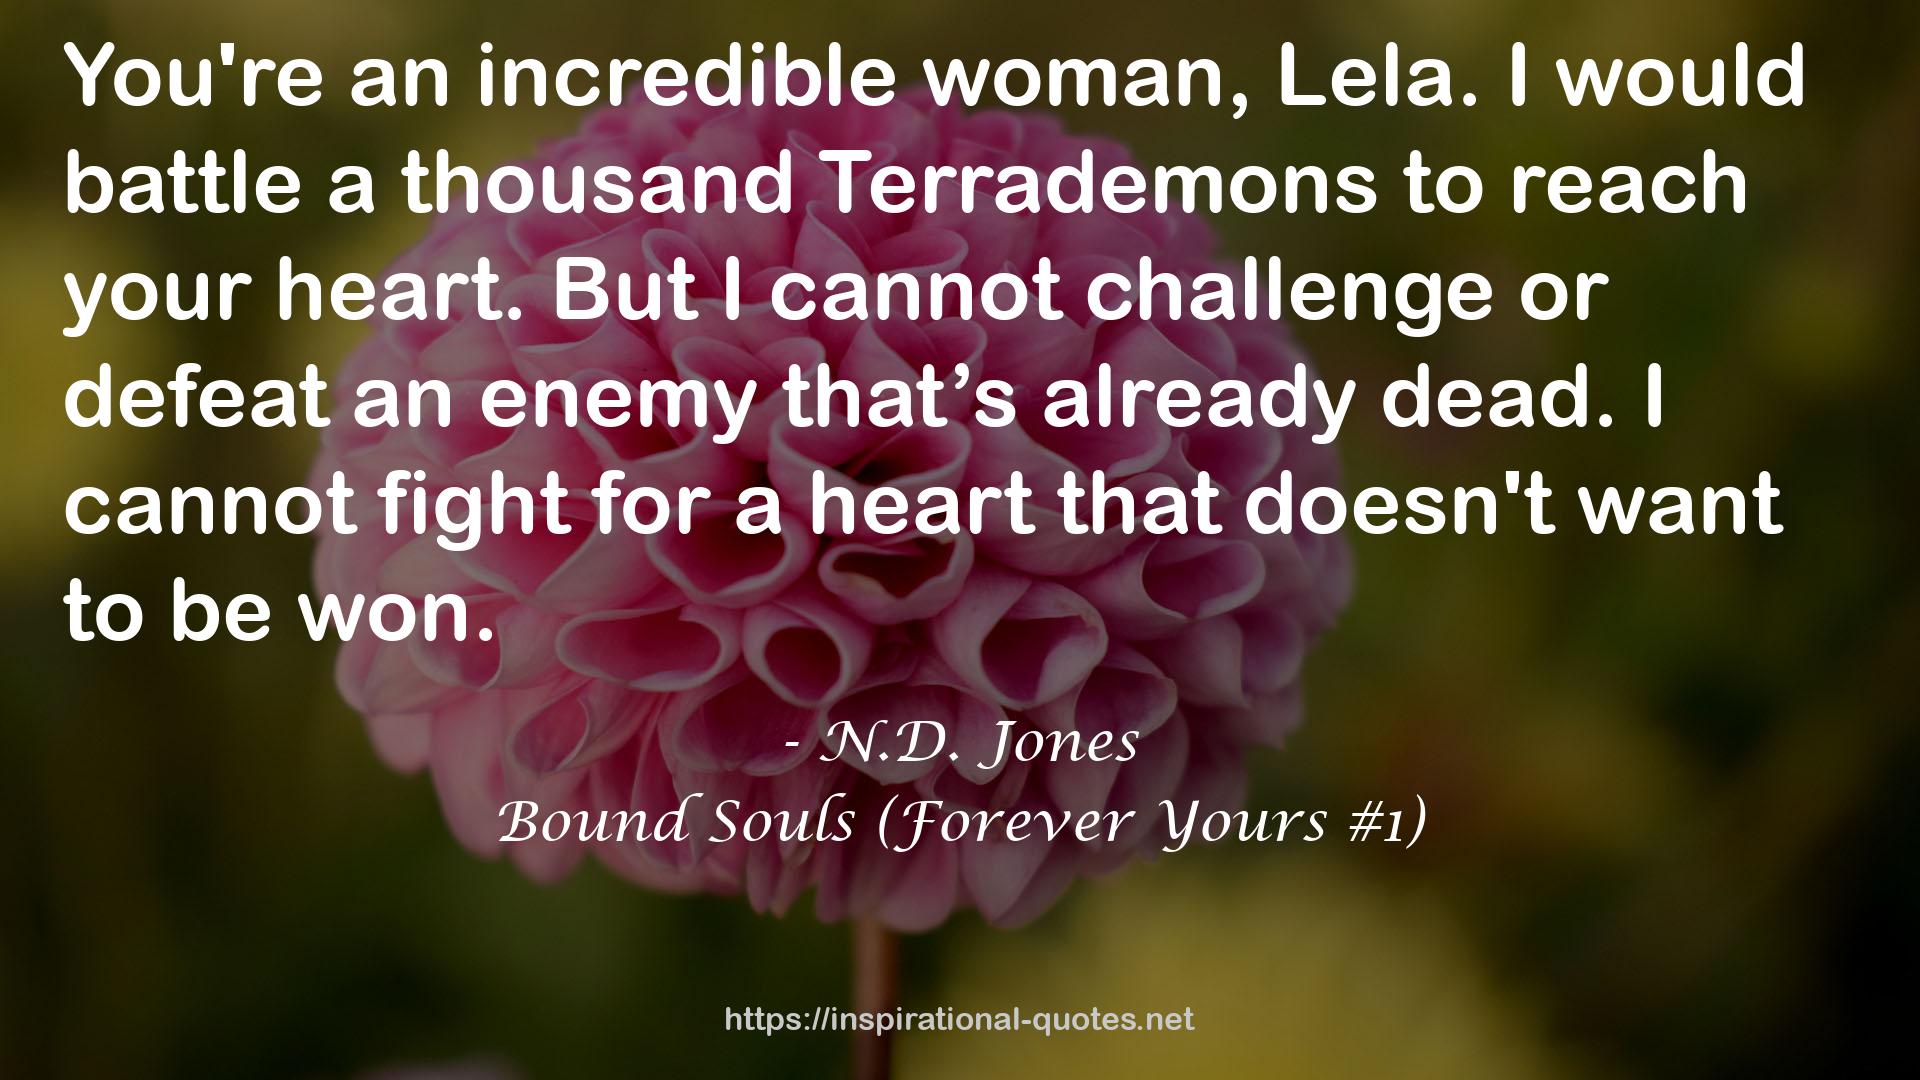 Bound Souls (Forever Yours #1) QUOTES